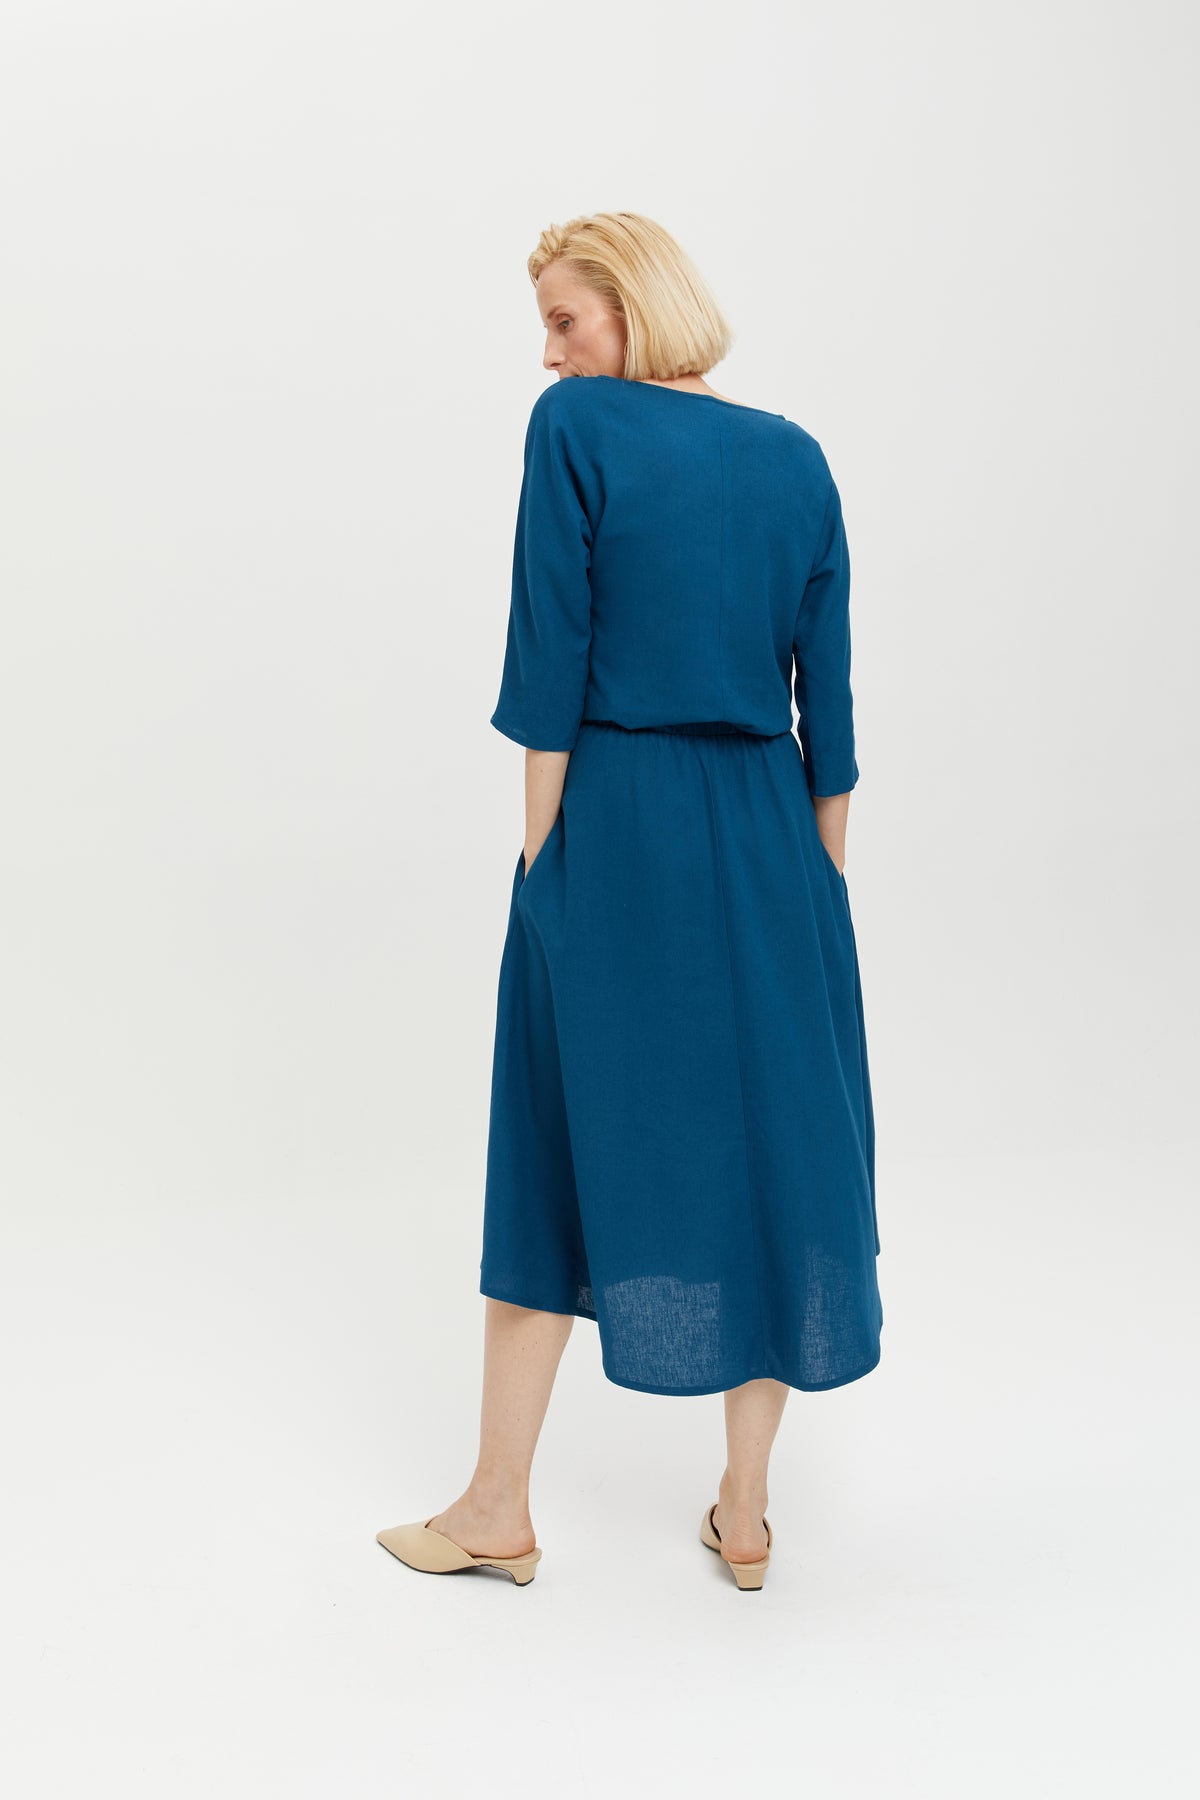 Nane | Linen Dress with 3/4 Sleeves in Petrol-Blue